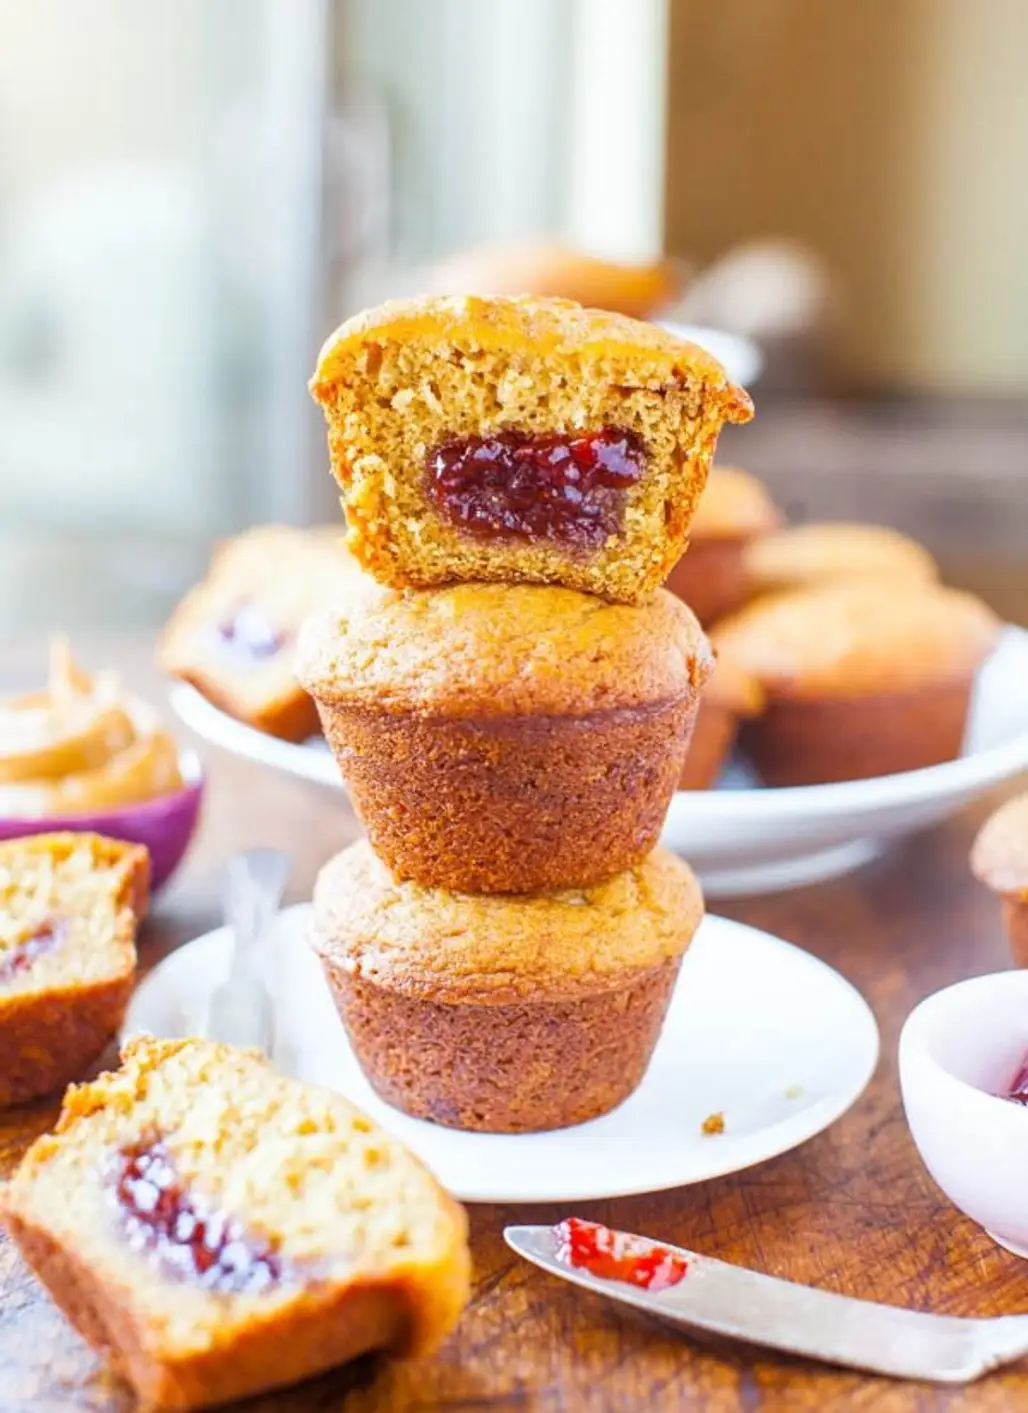 Flourless Peanut Butter and Jelly Muffins